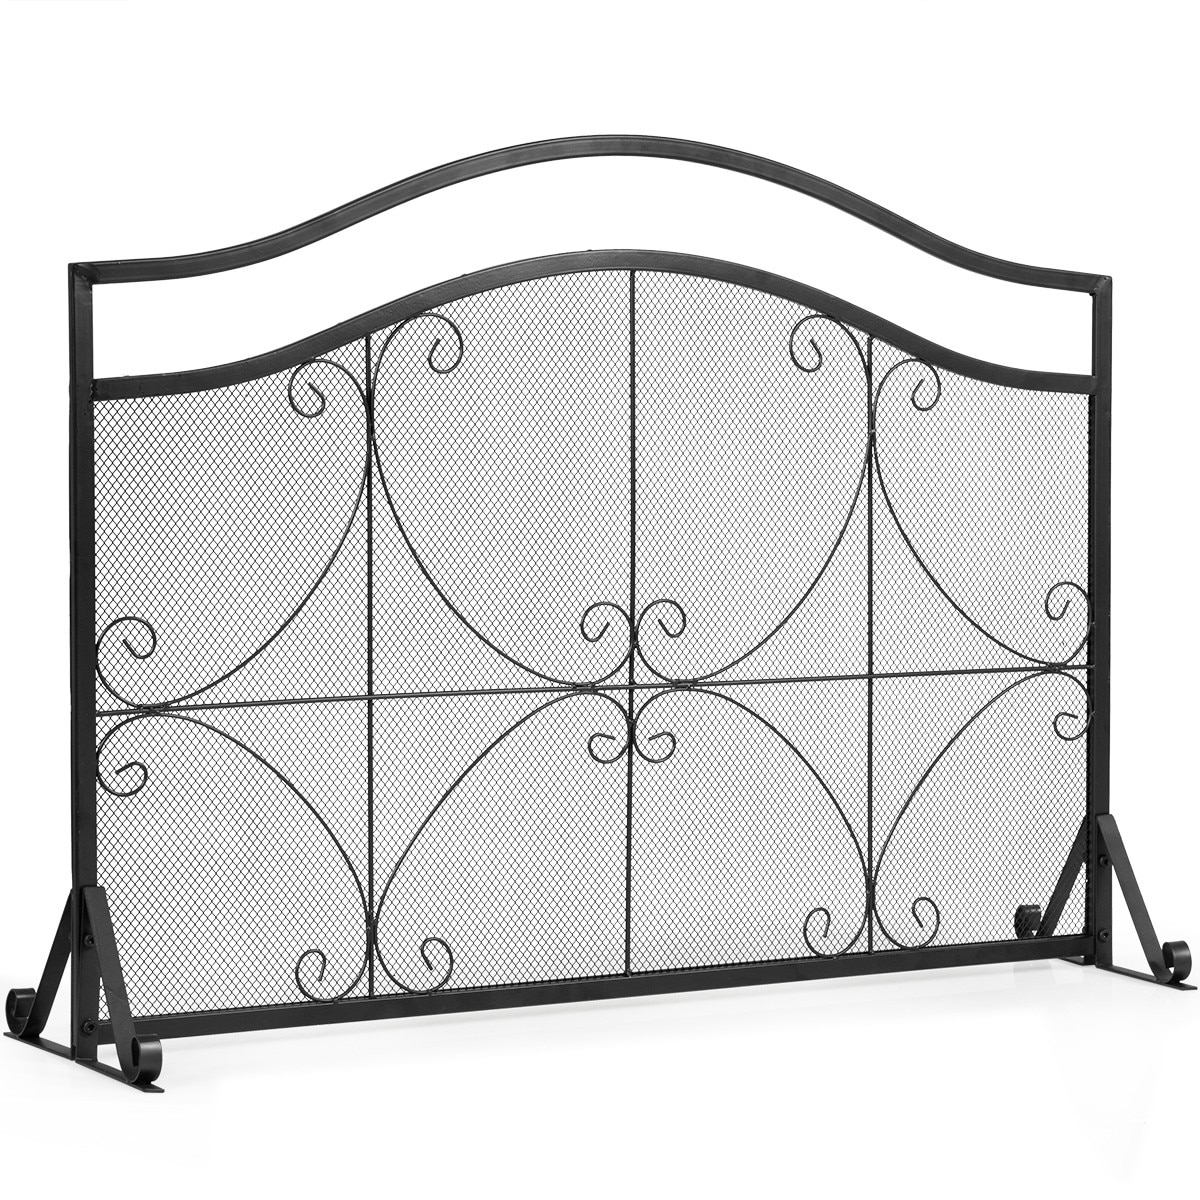 Fire Beauty Flat Panel Fireplace Screen Free Standing Spark Guard Wrought  Metal Gate Cover for Home, Decorative Mesh Fire Place Safety Fence,Baby  Safe